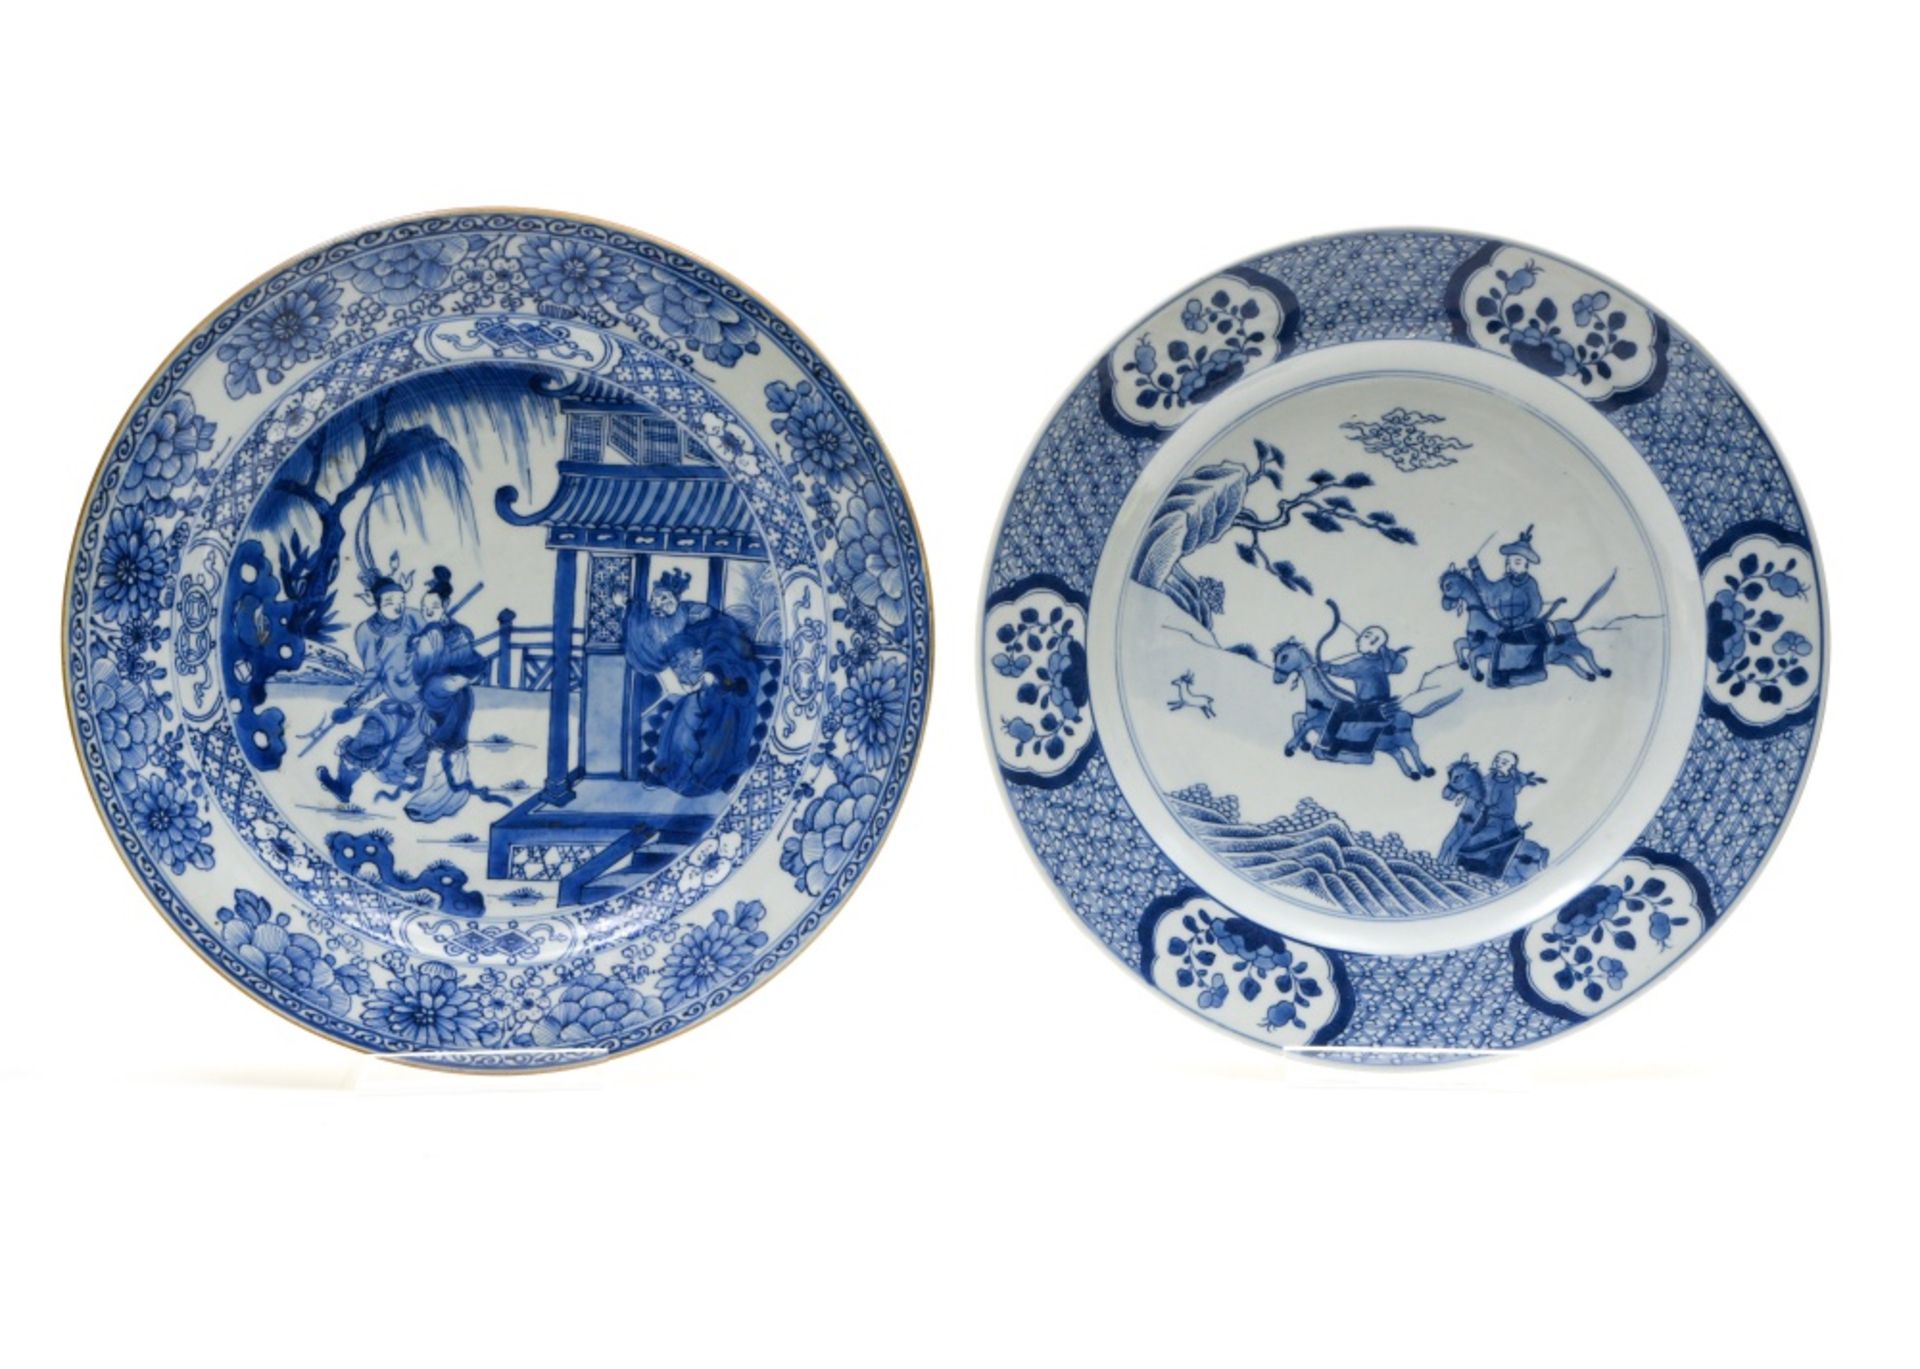 China, 18th-19th century Two soup plates, Blue and white porcelain, one has a conch mark under the